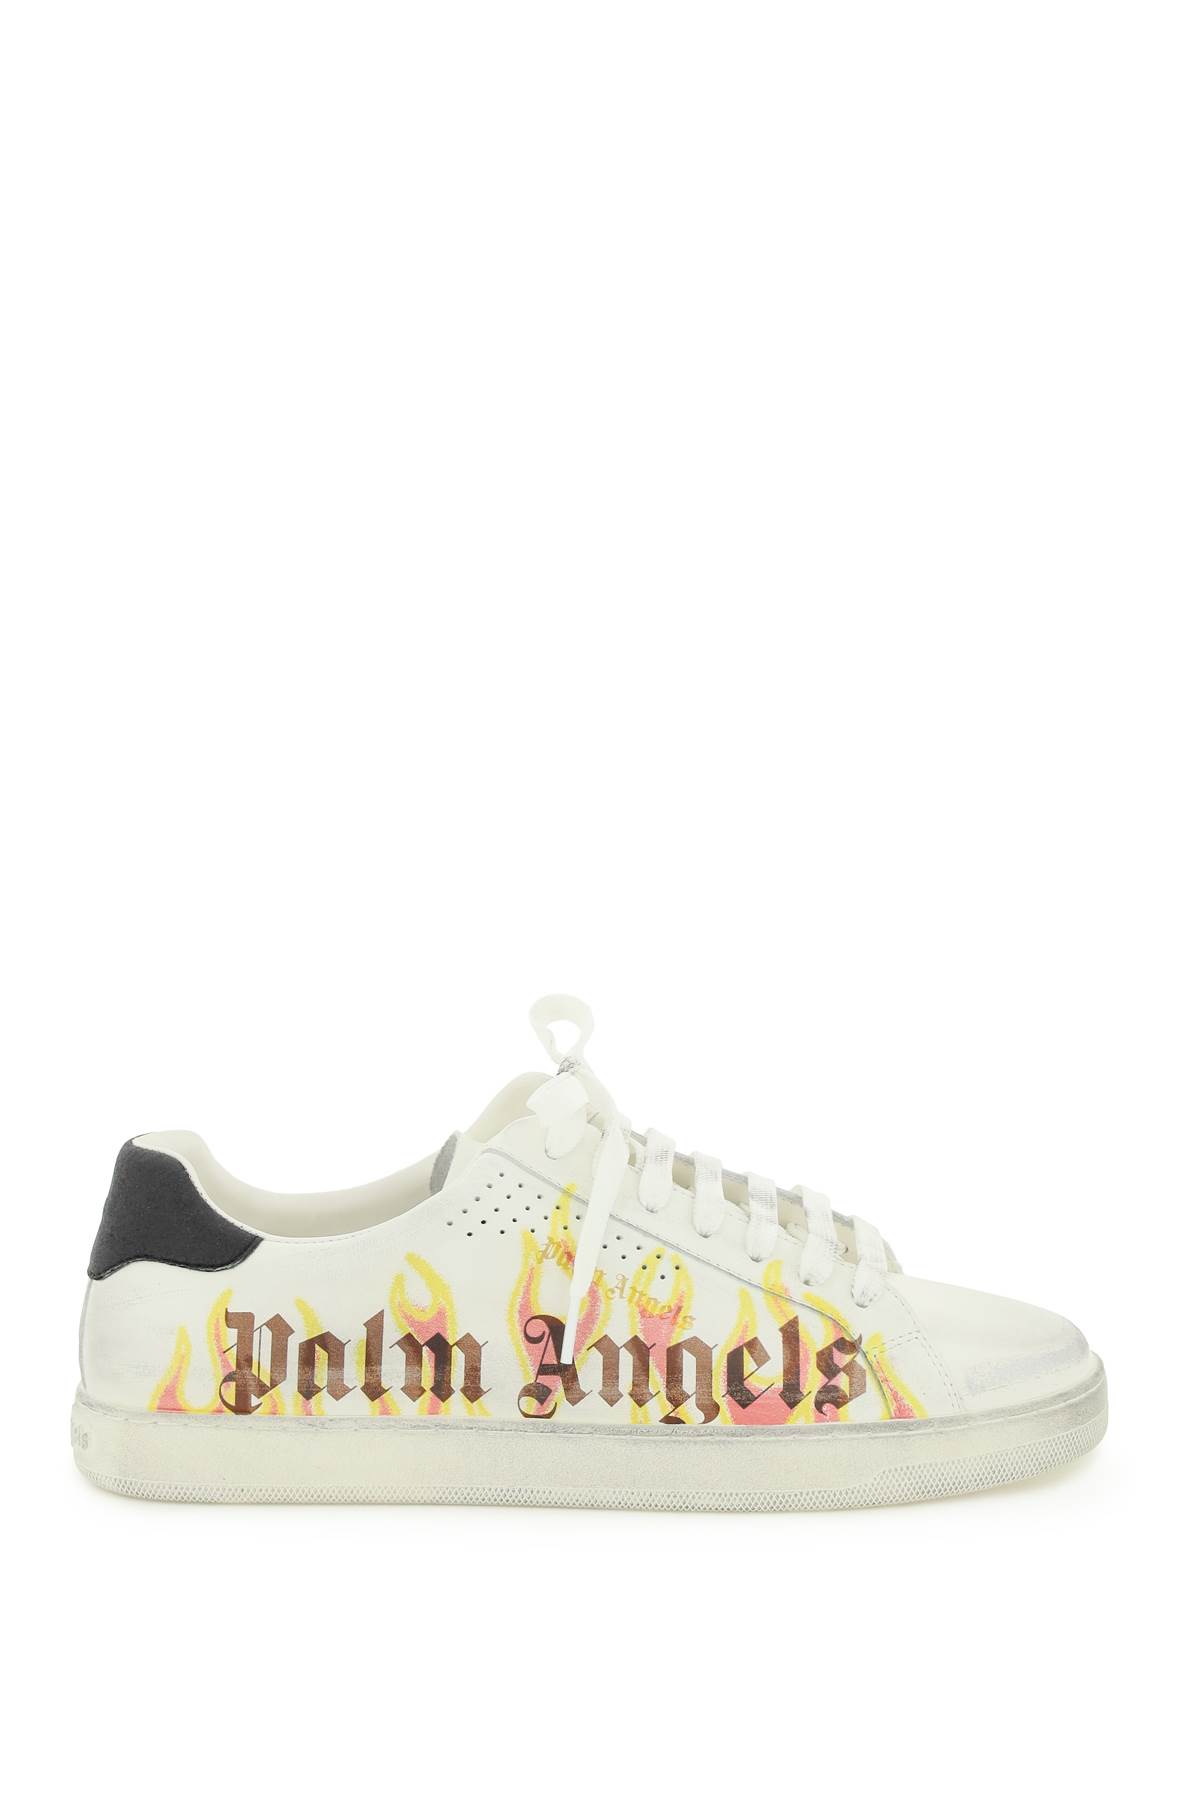 Palm Angels Flame Print palm One Sneakers